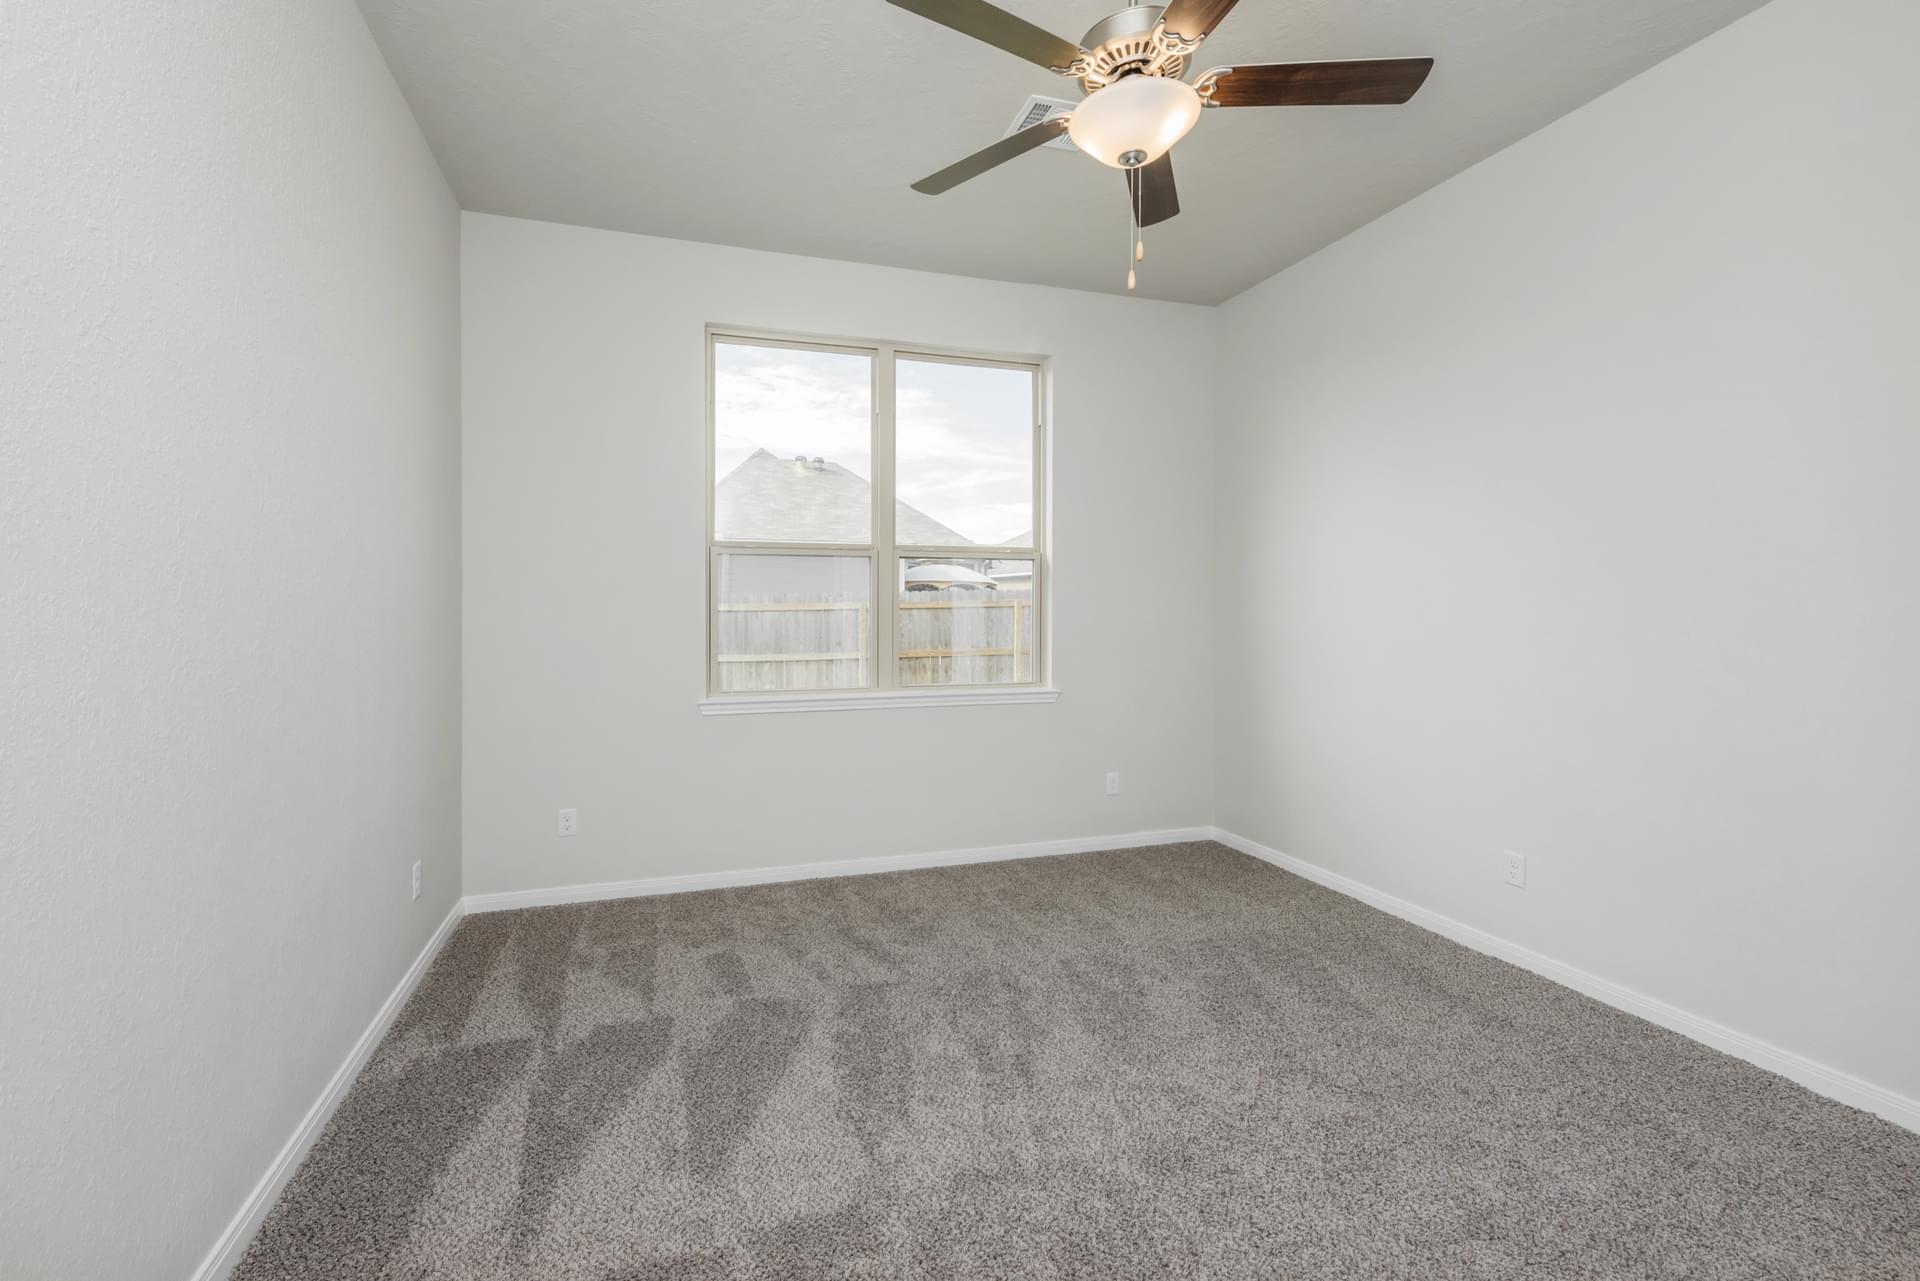 3br New Home in Copperas Cove, TX